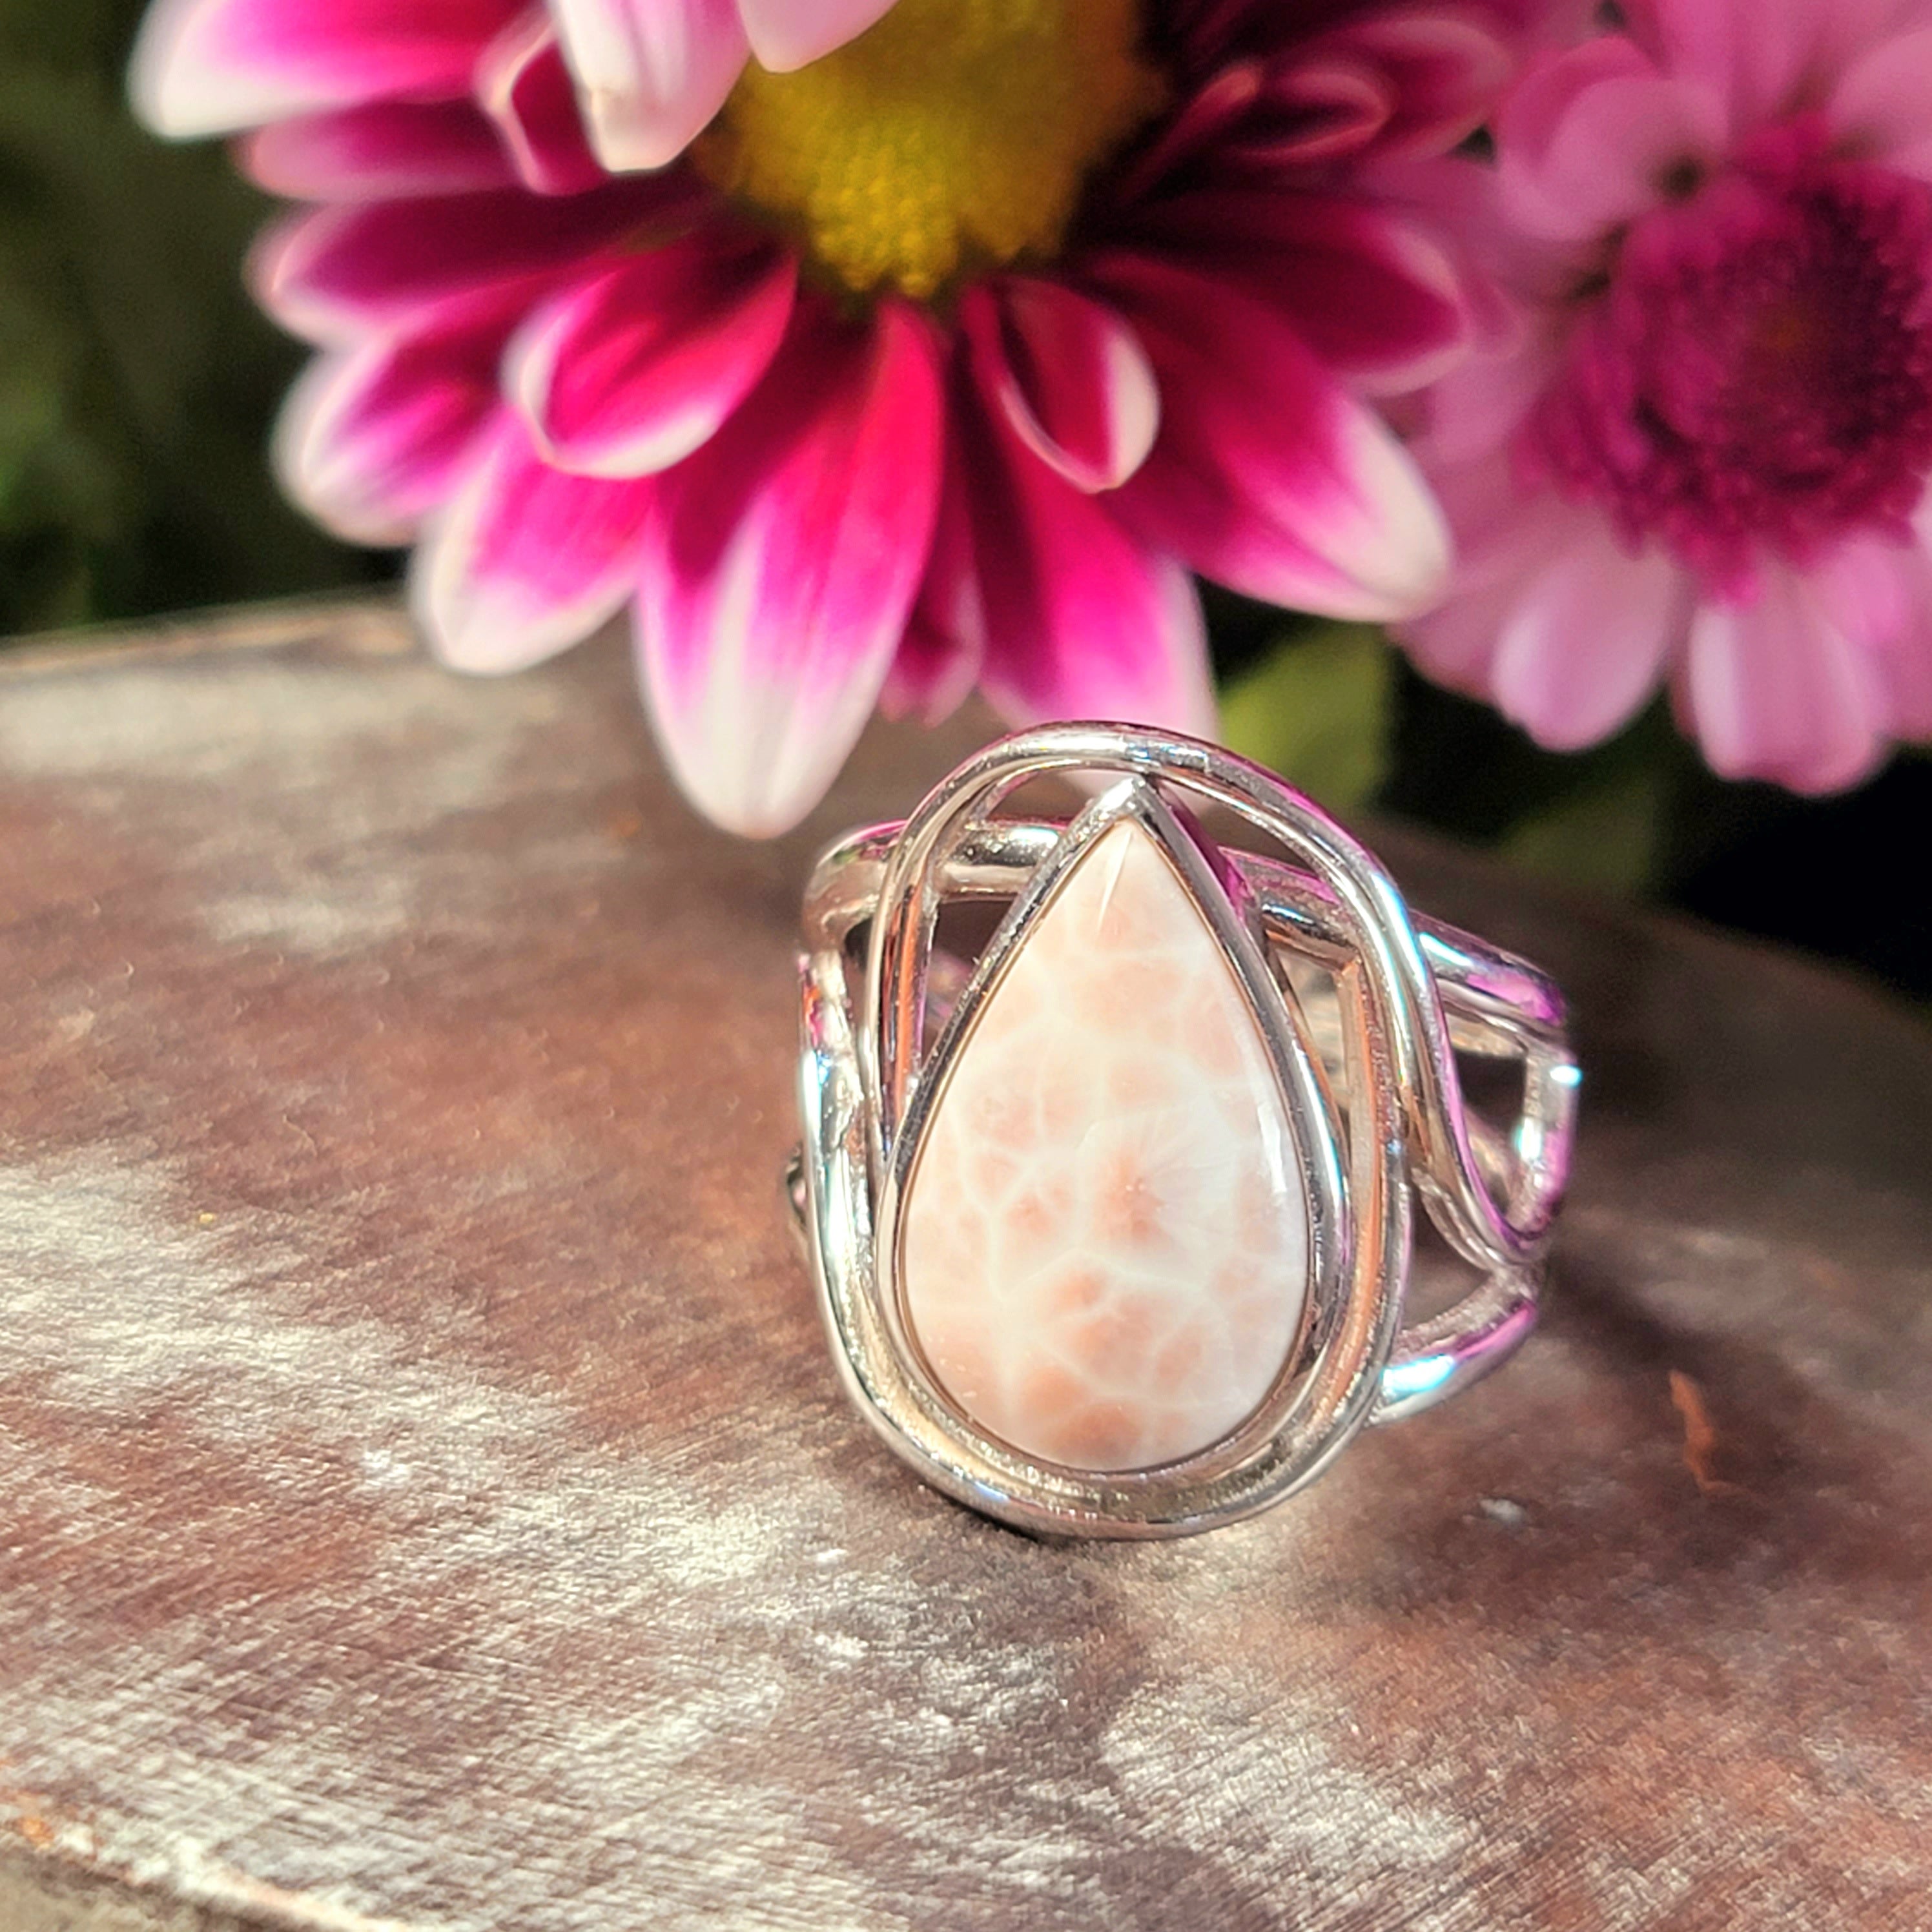 Natrolite Adjustable Finger Cuff Ring .925 Silver for Channeling and Awakening your Spiritual Gifts